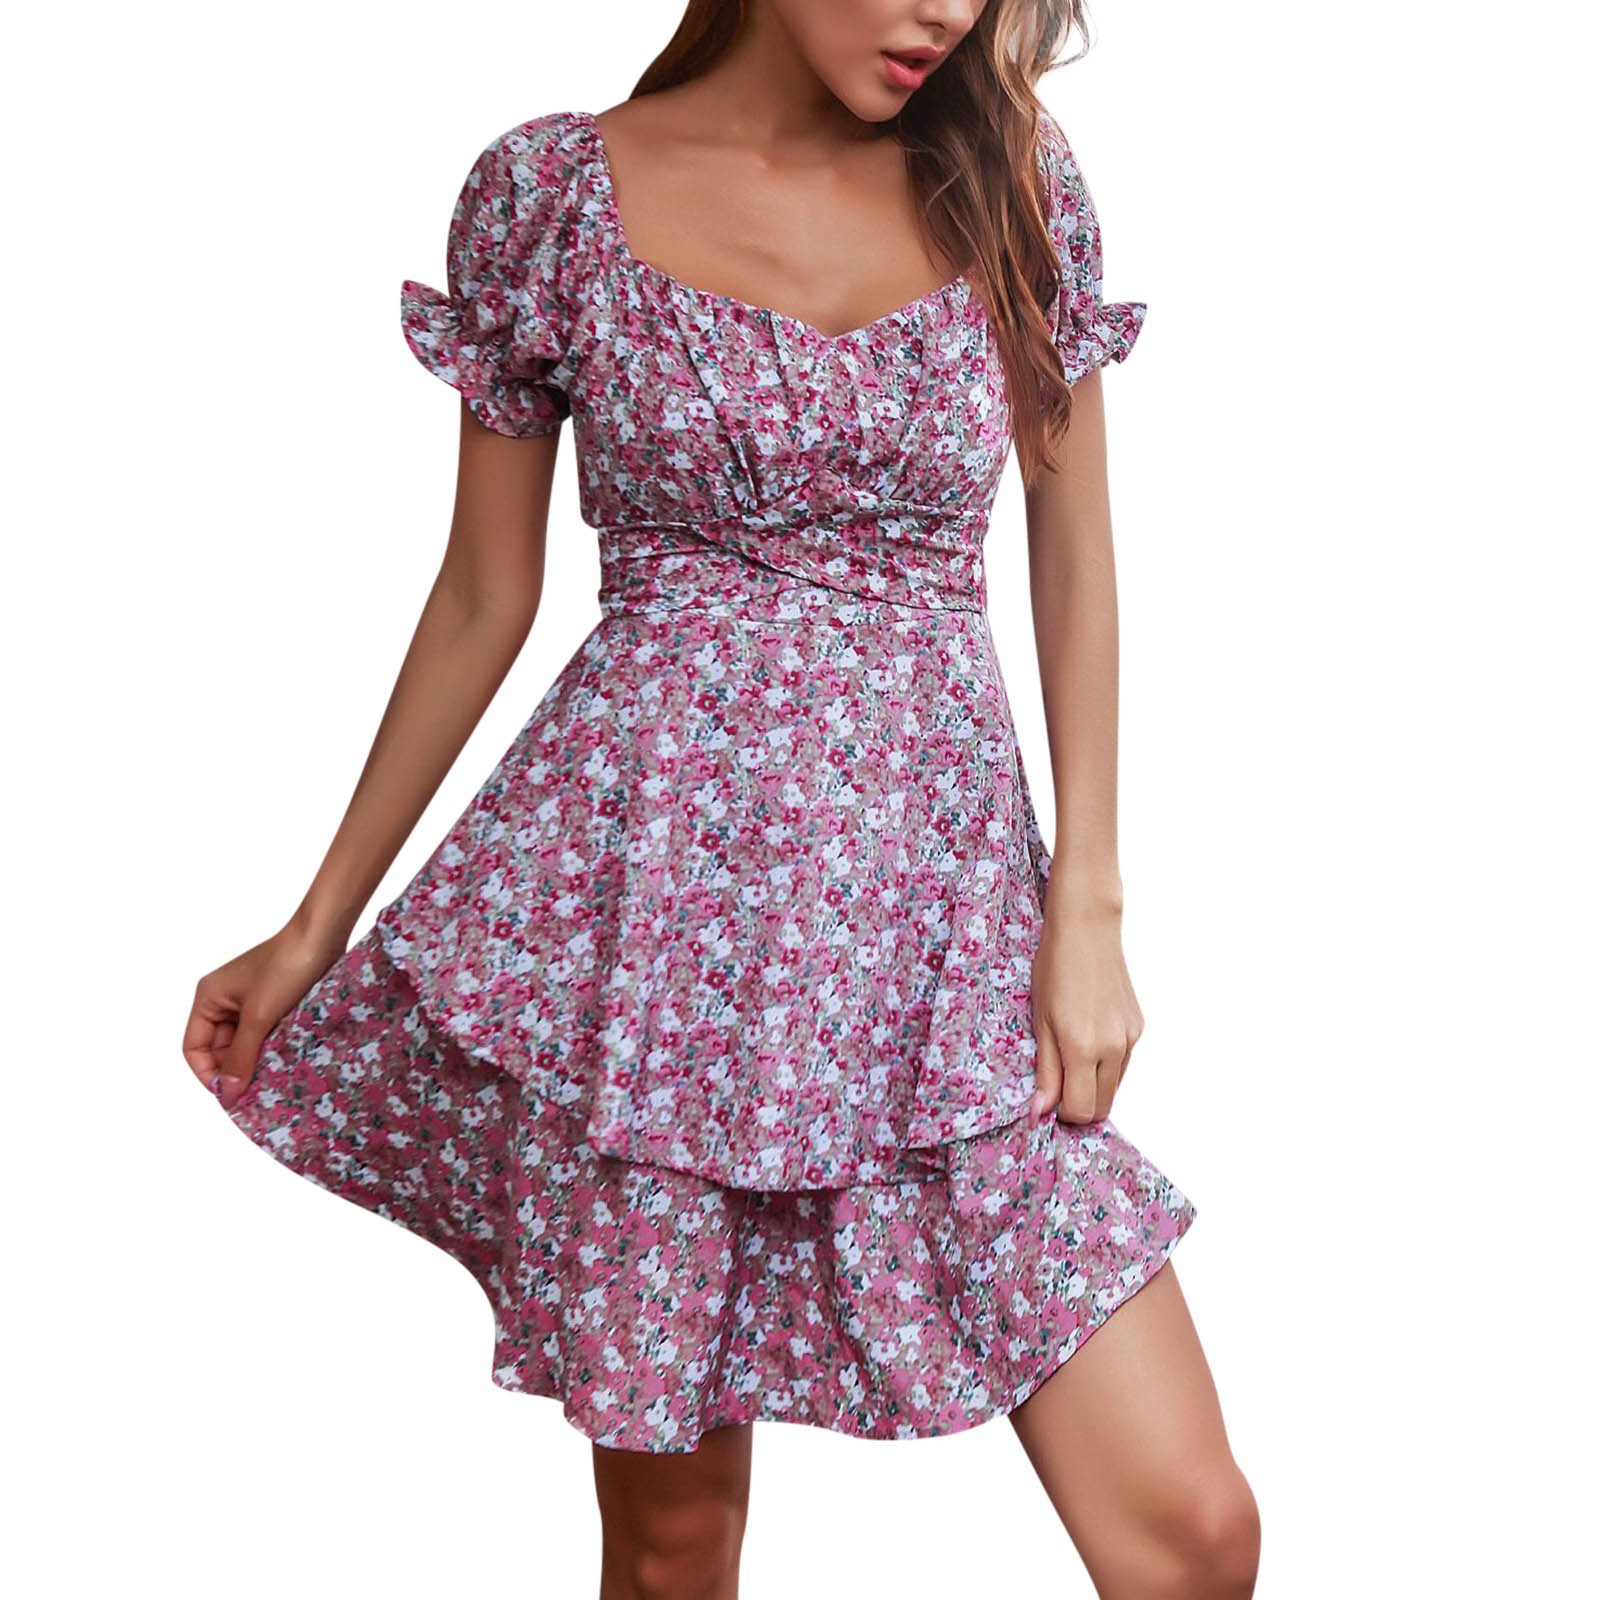 Over Again - Floral Mini Dress for Teen Girls